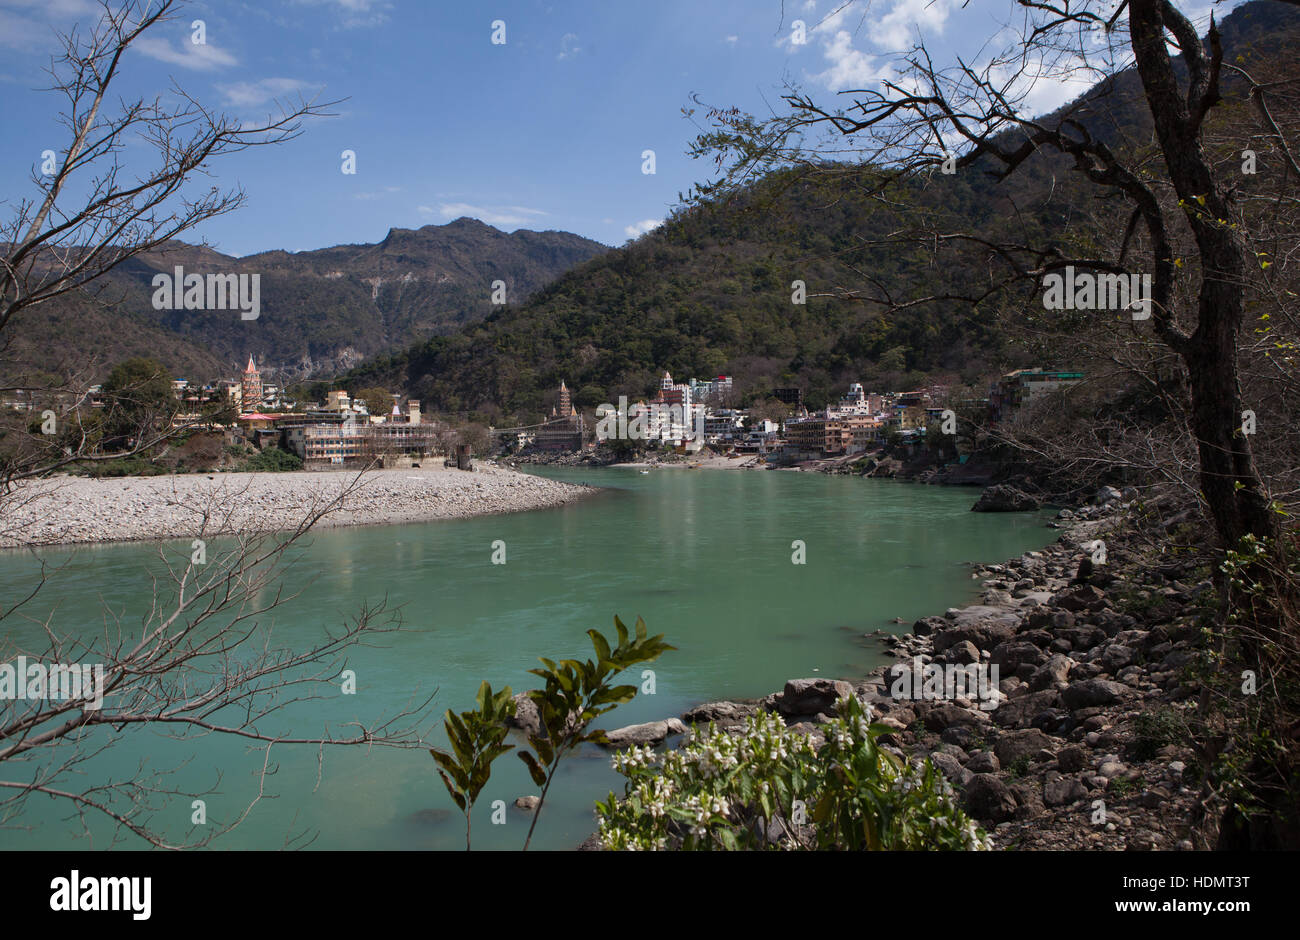 High angle view of the Ganges River in Rishikesh, Uttarakhand, India Stock Photo